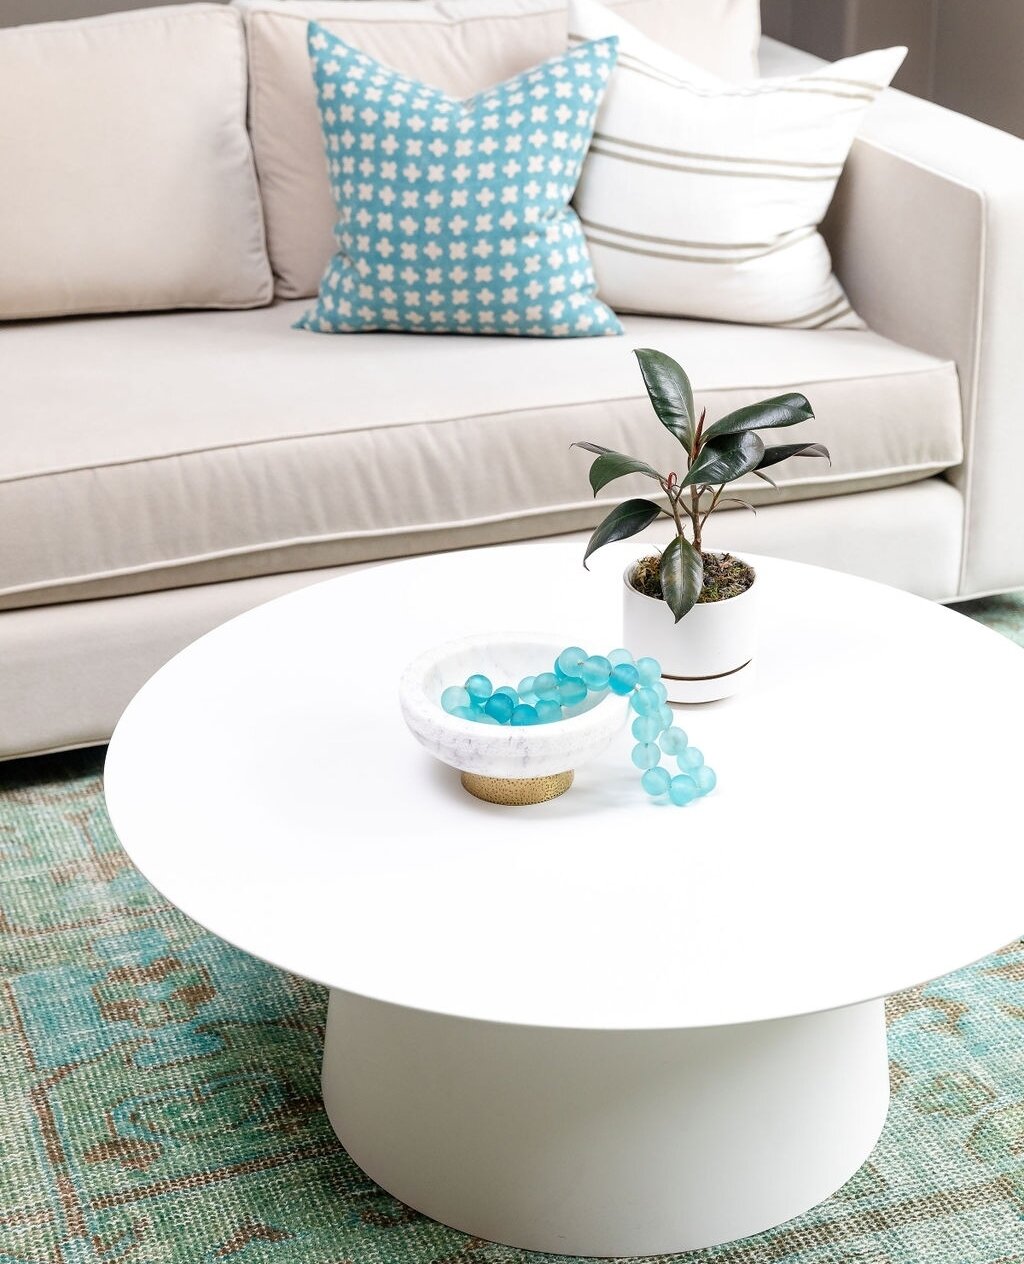 #brightwhitewednesday : there's nothing like a simple white coffee table to provide a blank canvas for styling. 😀⁠
⁠
The media room at our #seacliffsplendor project also serves as an entry to and from the backyard, and with two little boys and a lit